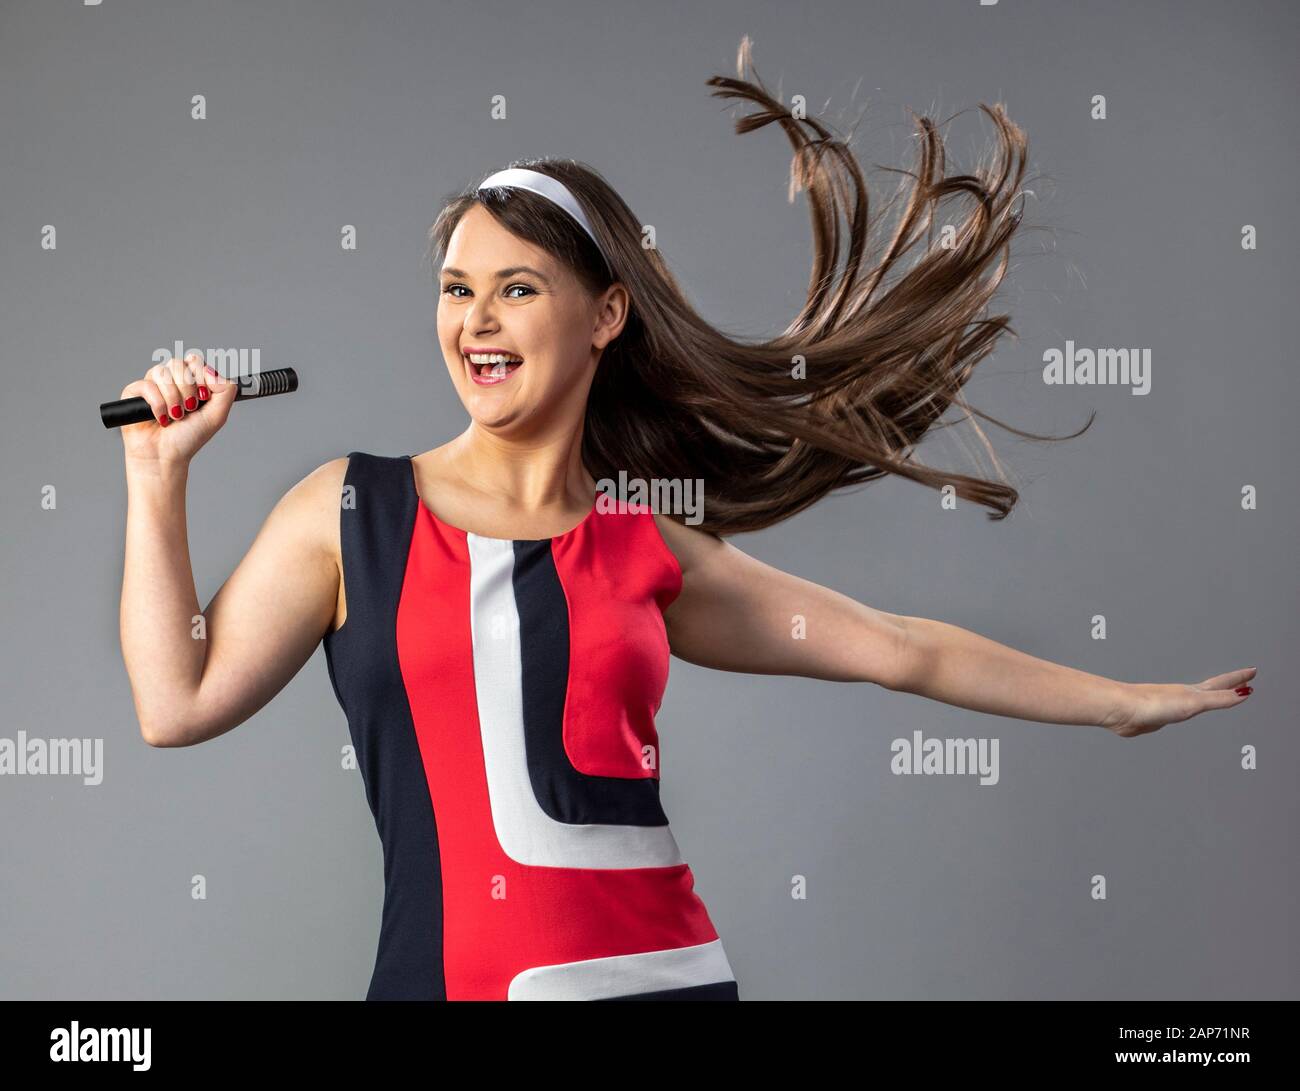 Samantha - internationally renowned classically trained soprano singer with a worldwide following. Stock Photo